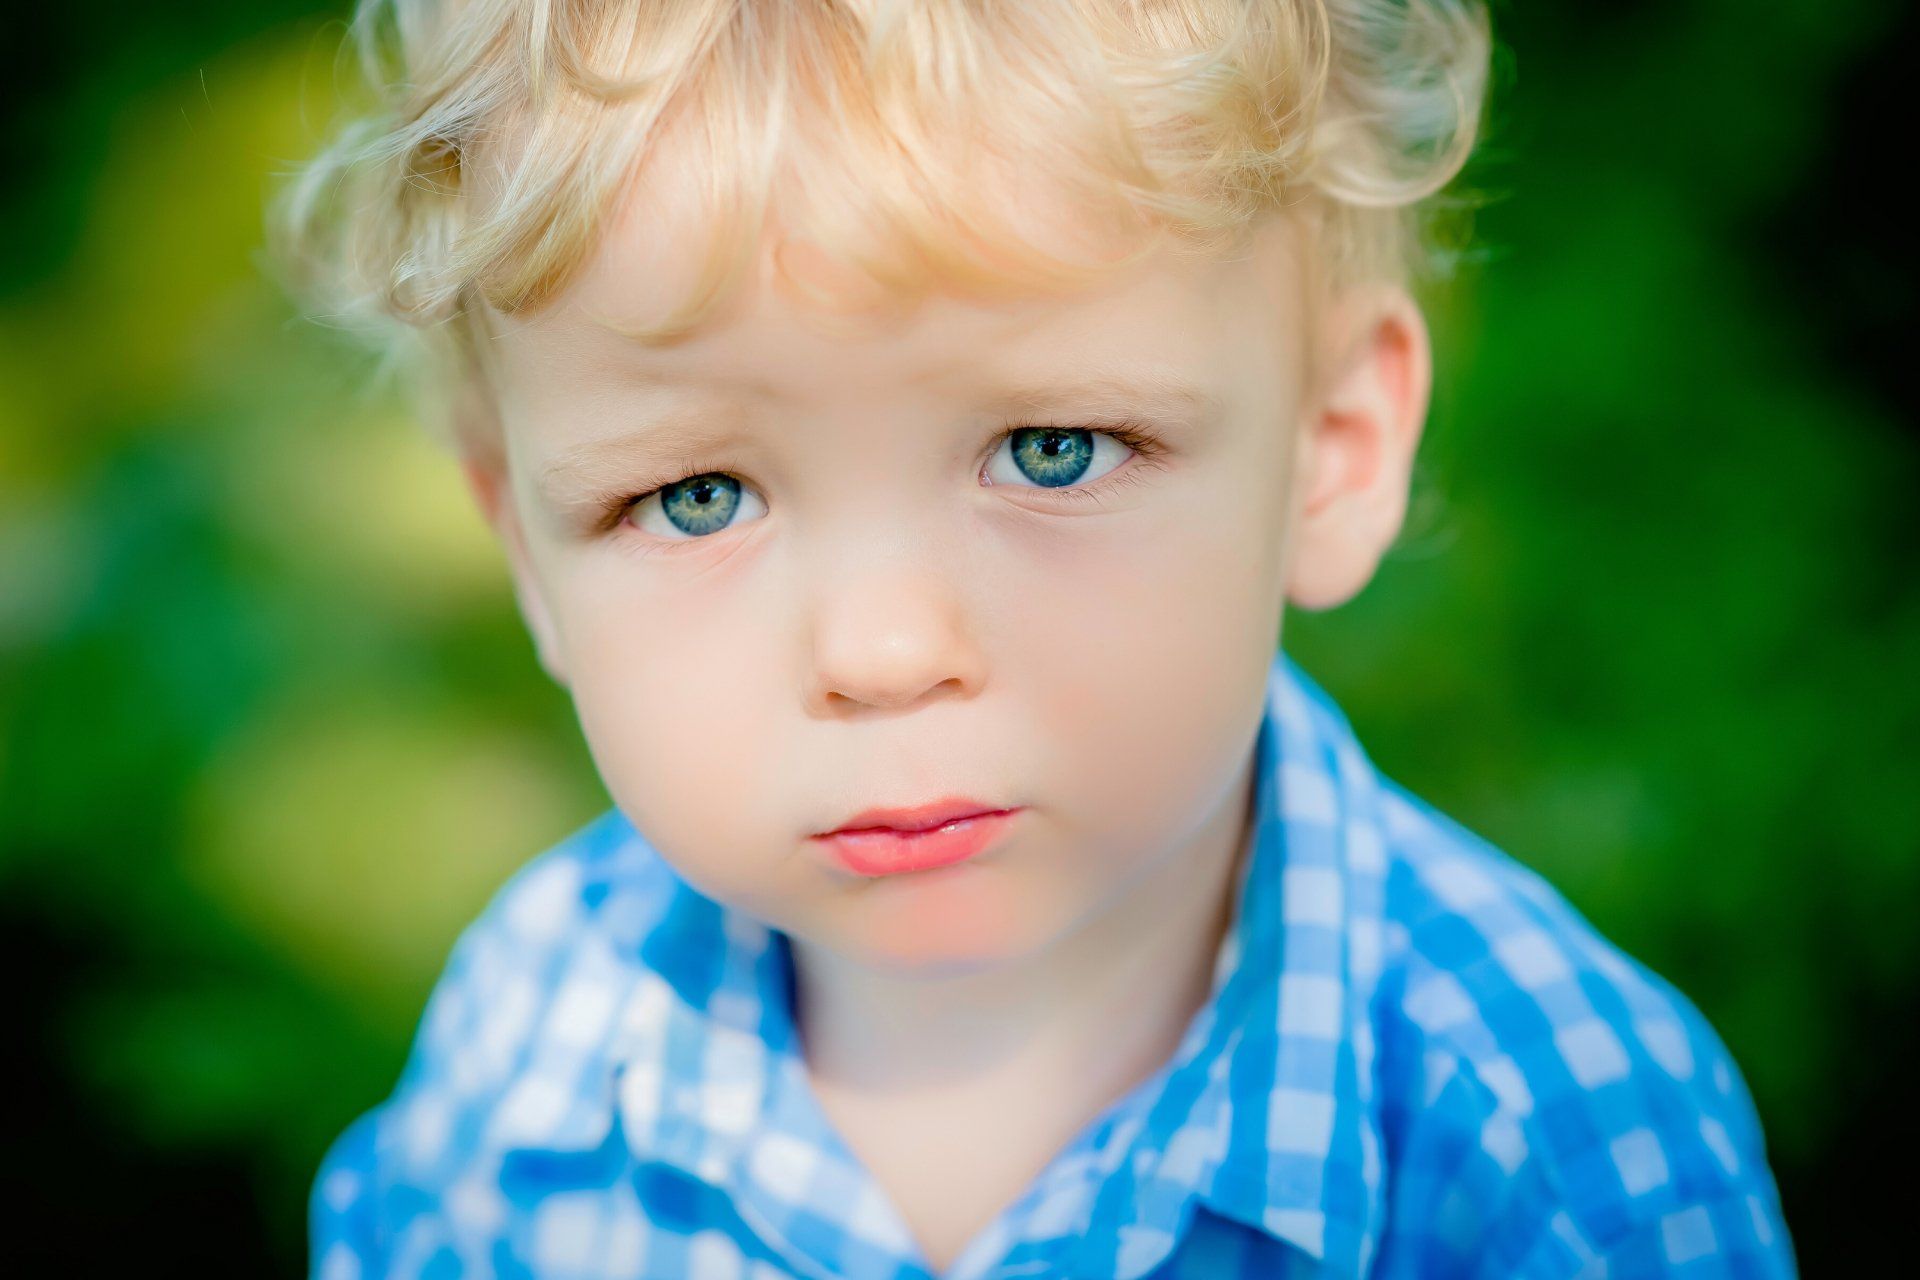 Young boy wearing blue and white shirt |  Child photography | Stacey Naglie Toronto